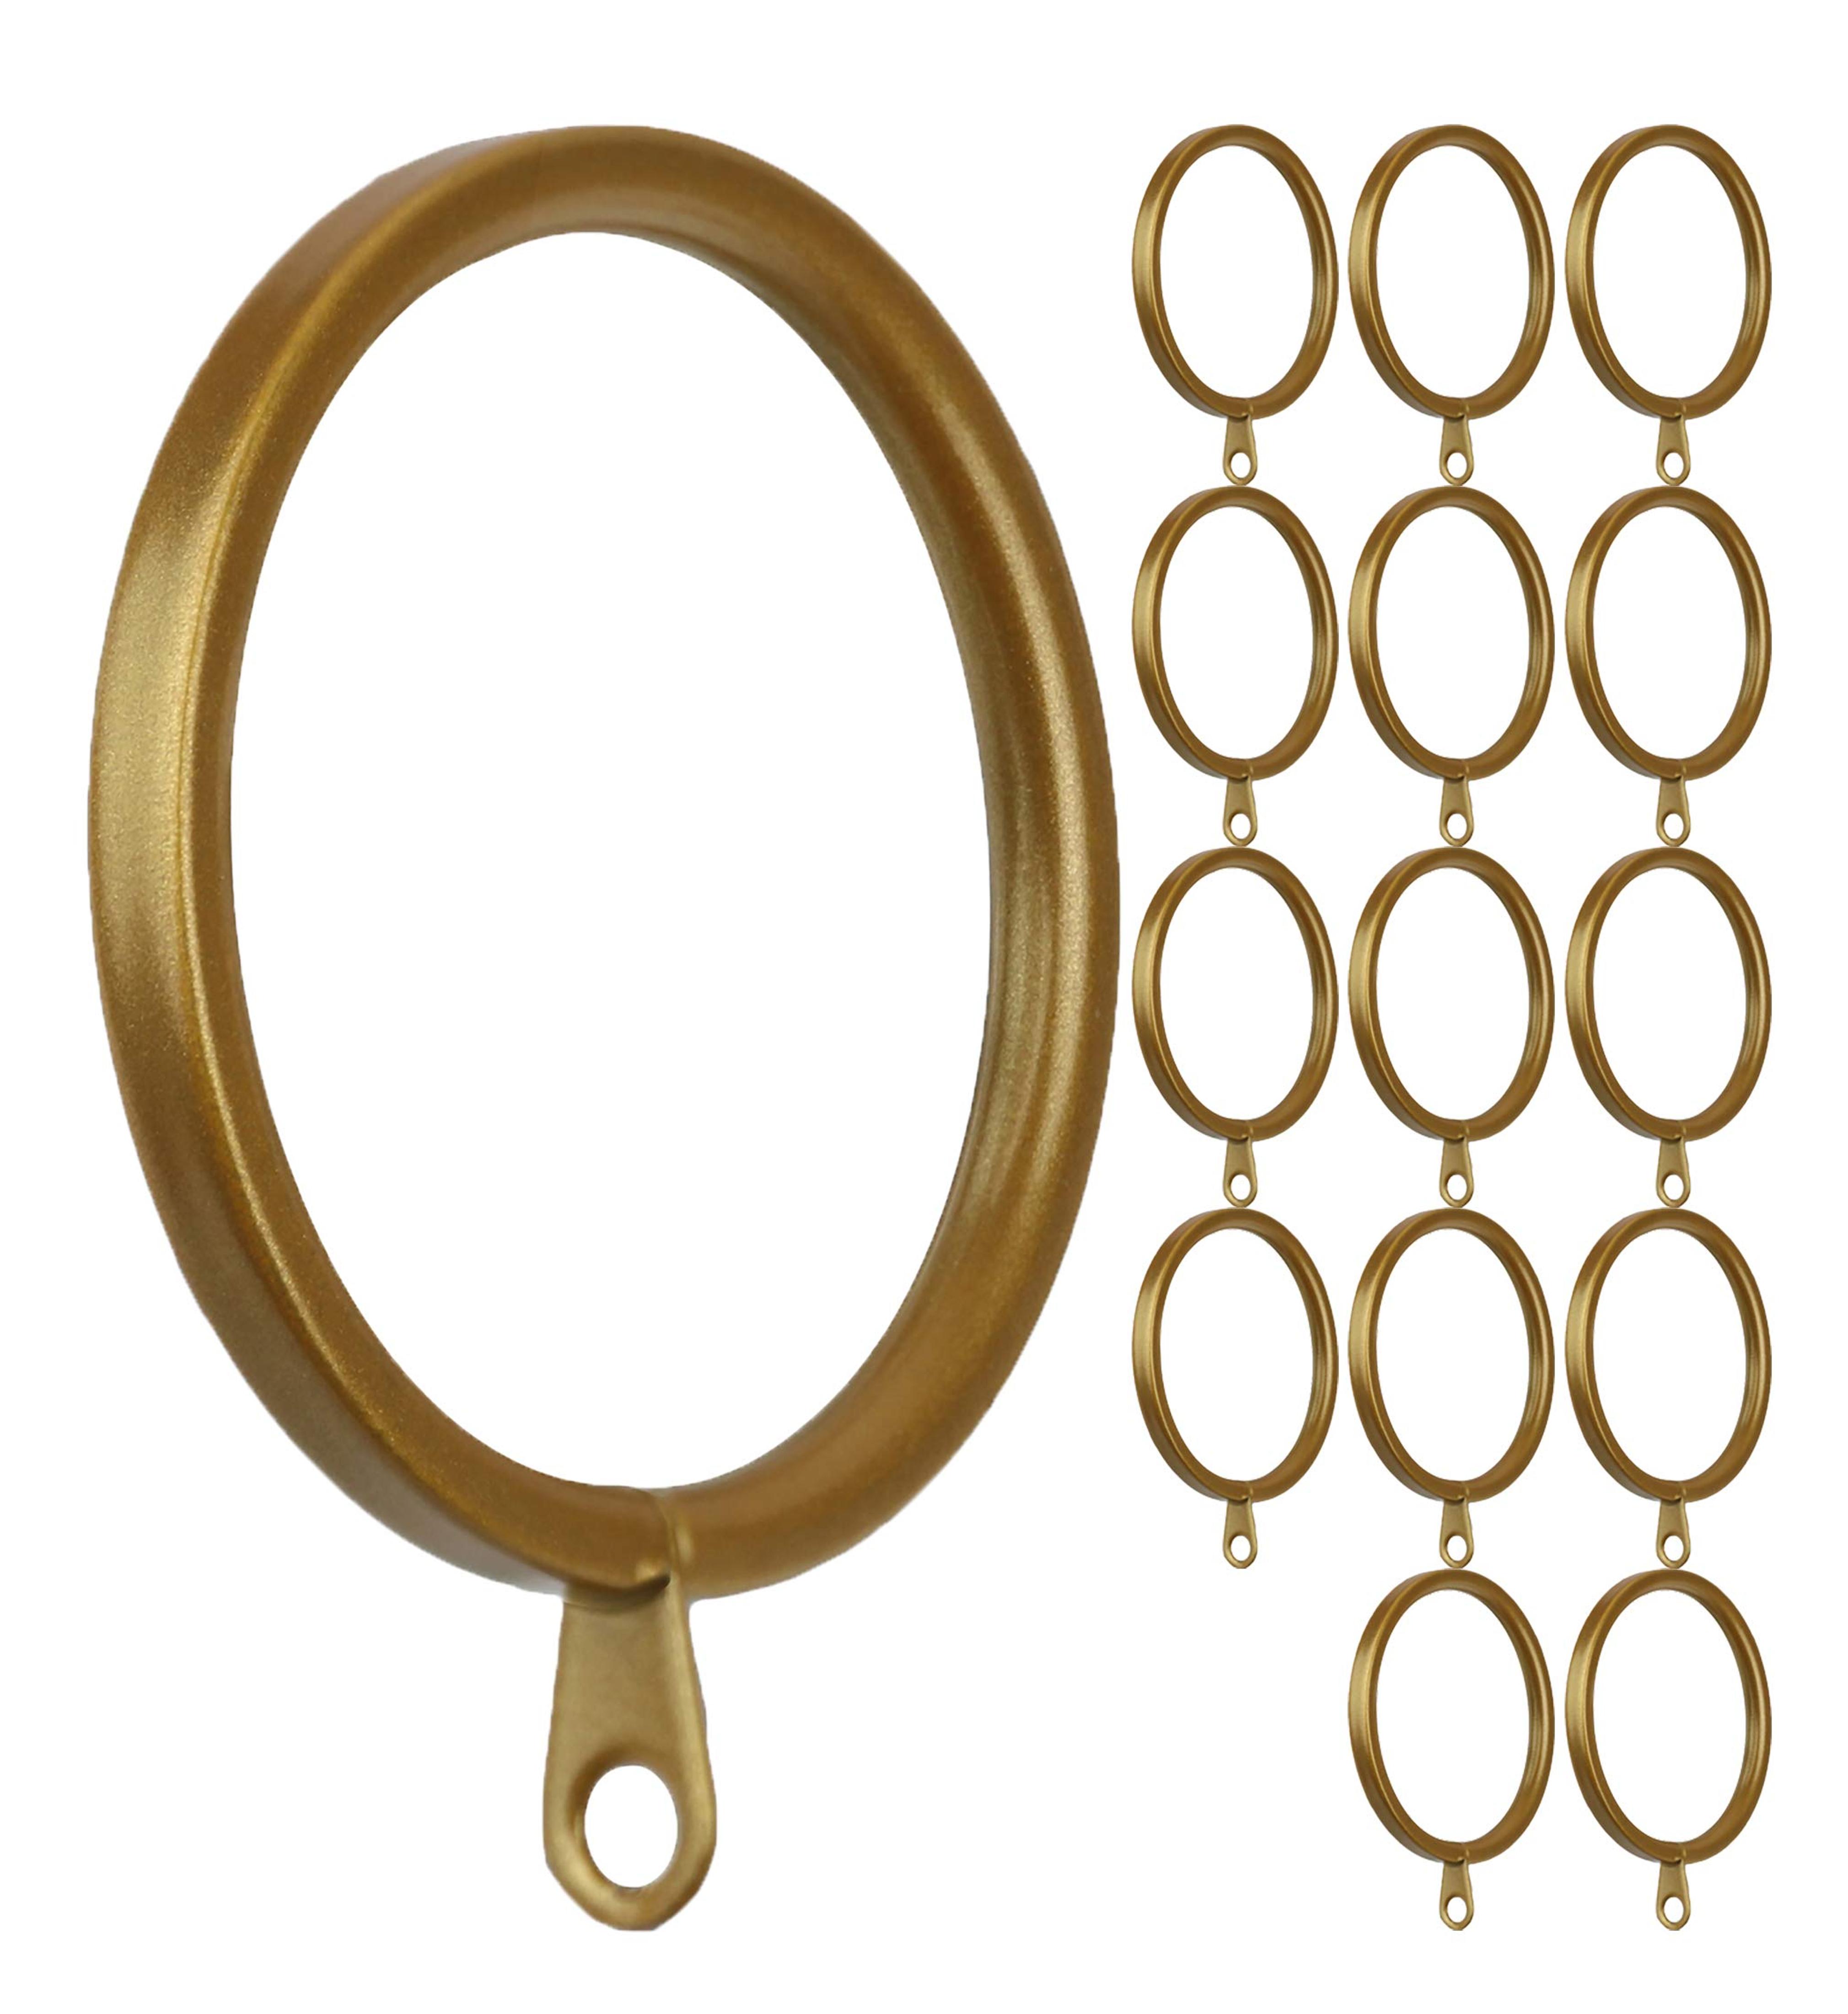 Amazon.com: Meriville 14 pcs Gold 2-Inch Inner Diameter Metal Flat Curtain Rings with Eyelets : Home & Kitchen